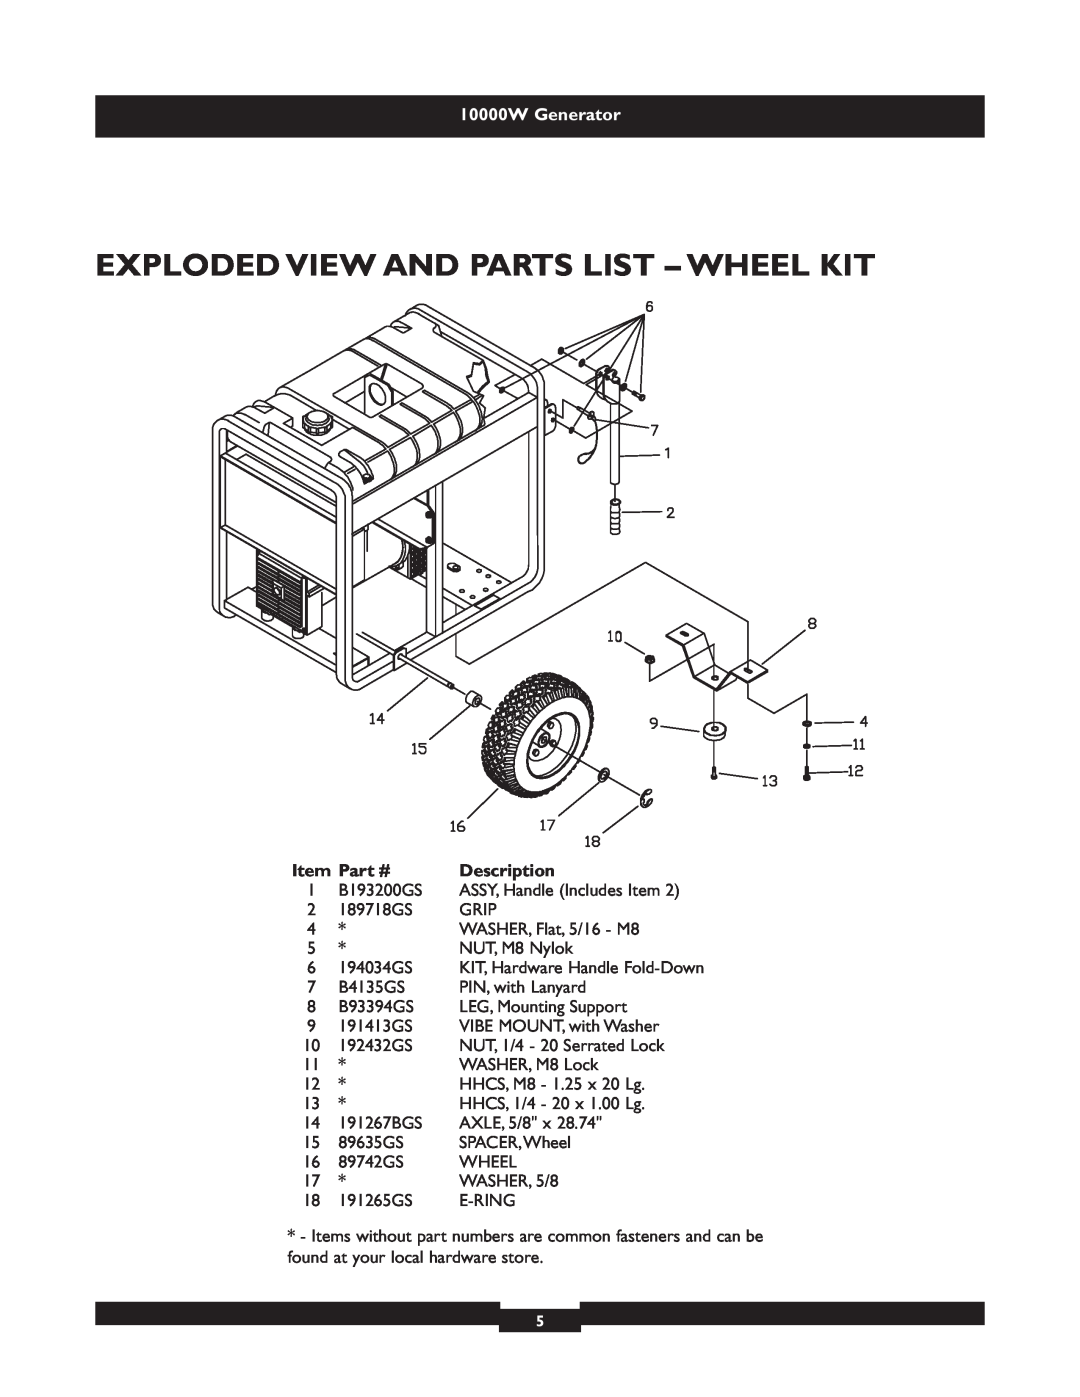 Briggs & Stratton 9801 manual Exploded View And Parts List - Wheel Kit, 10000W Generator, Description 